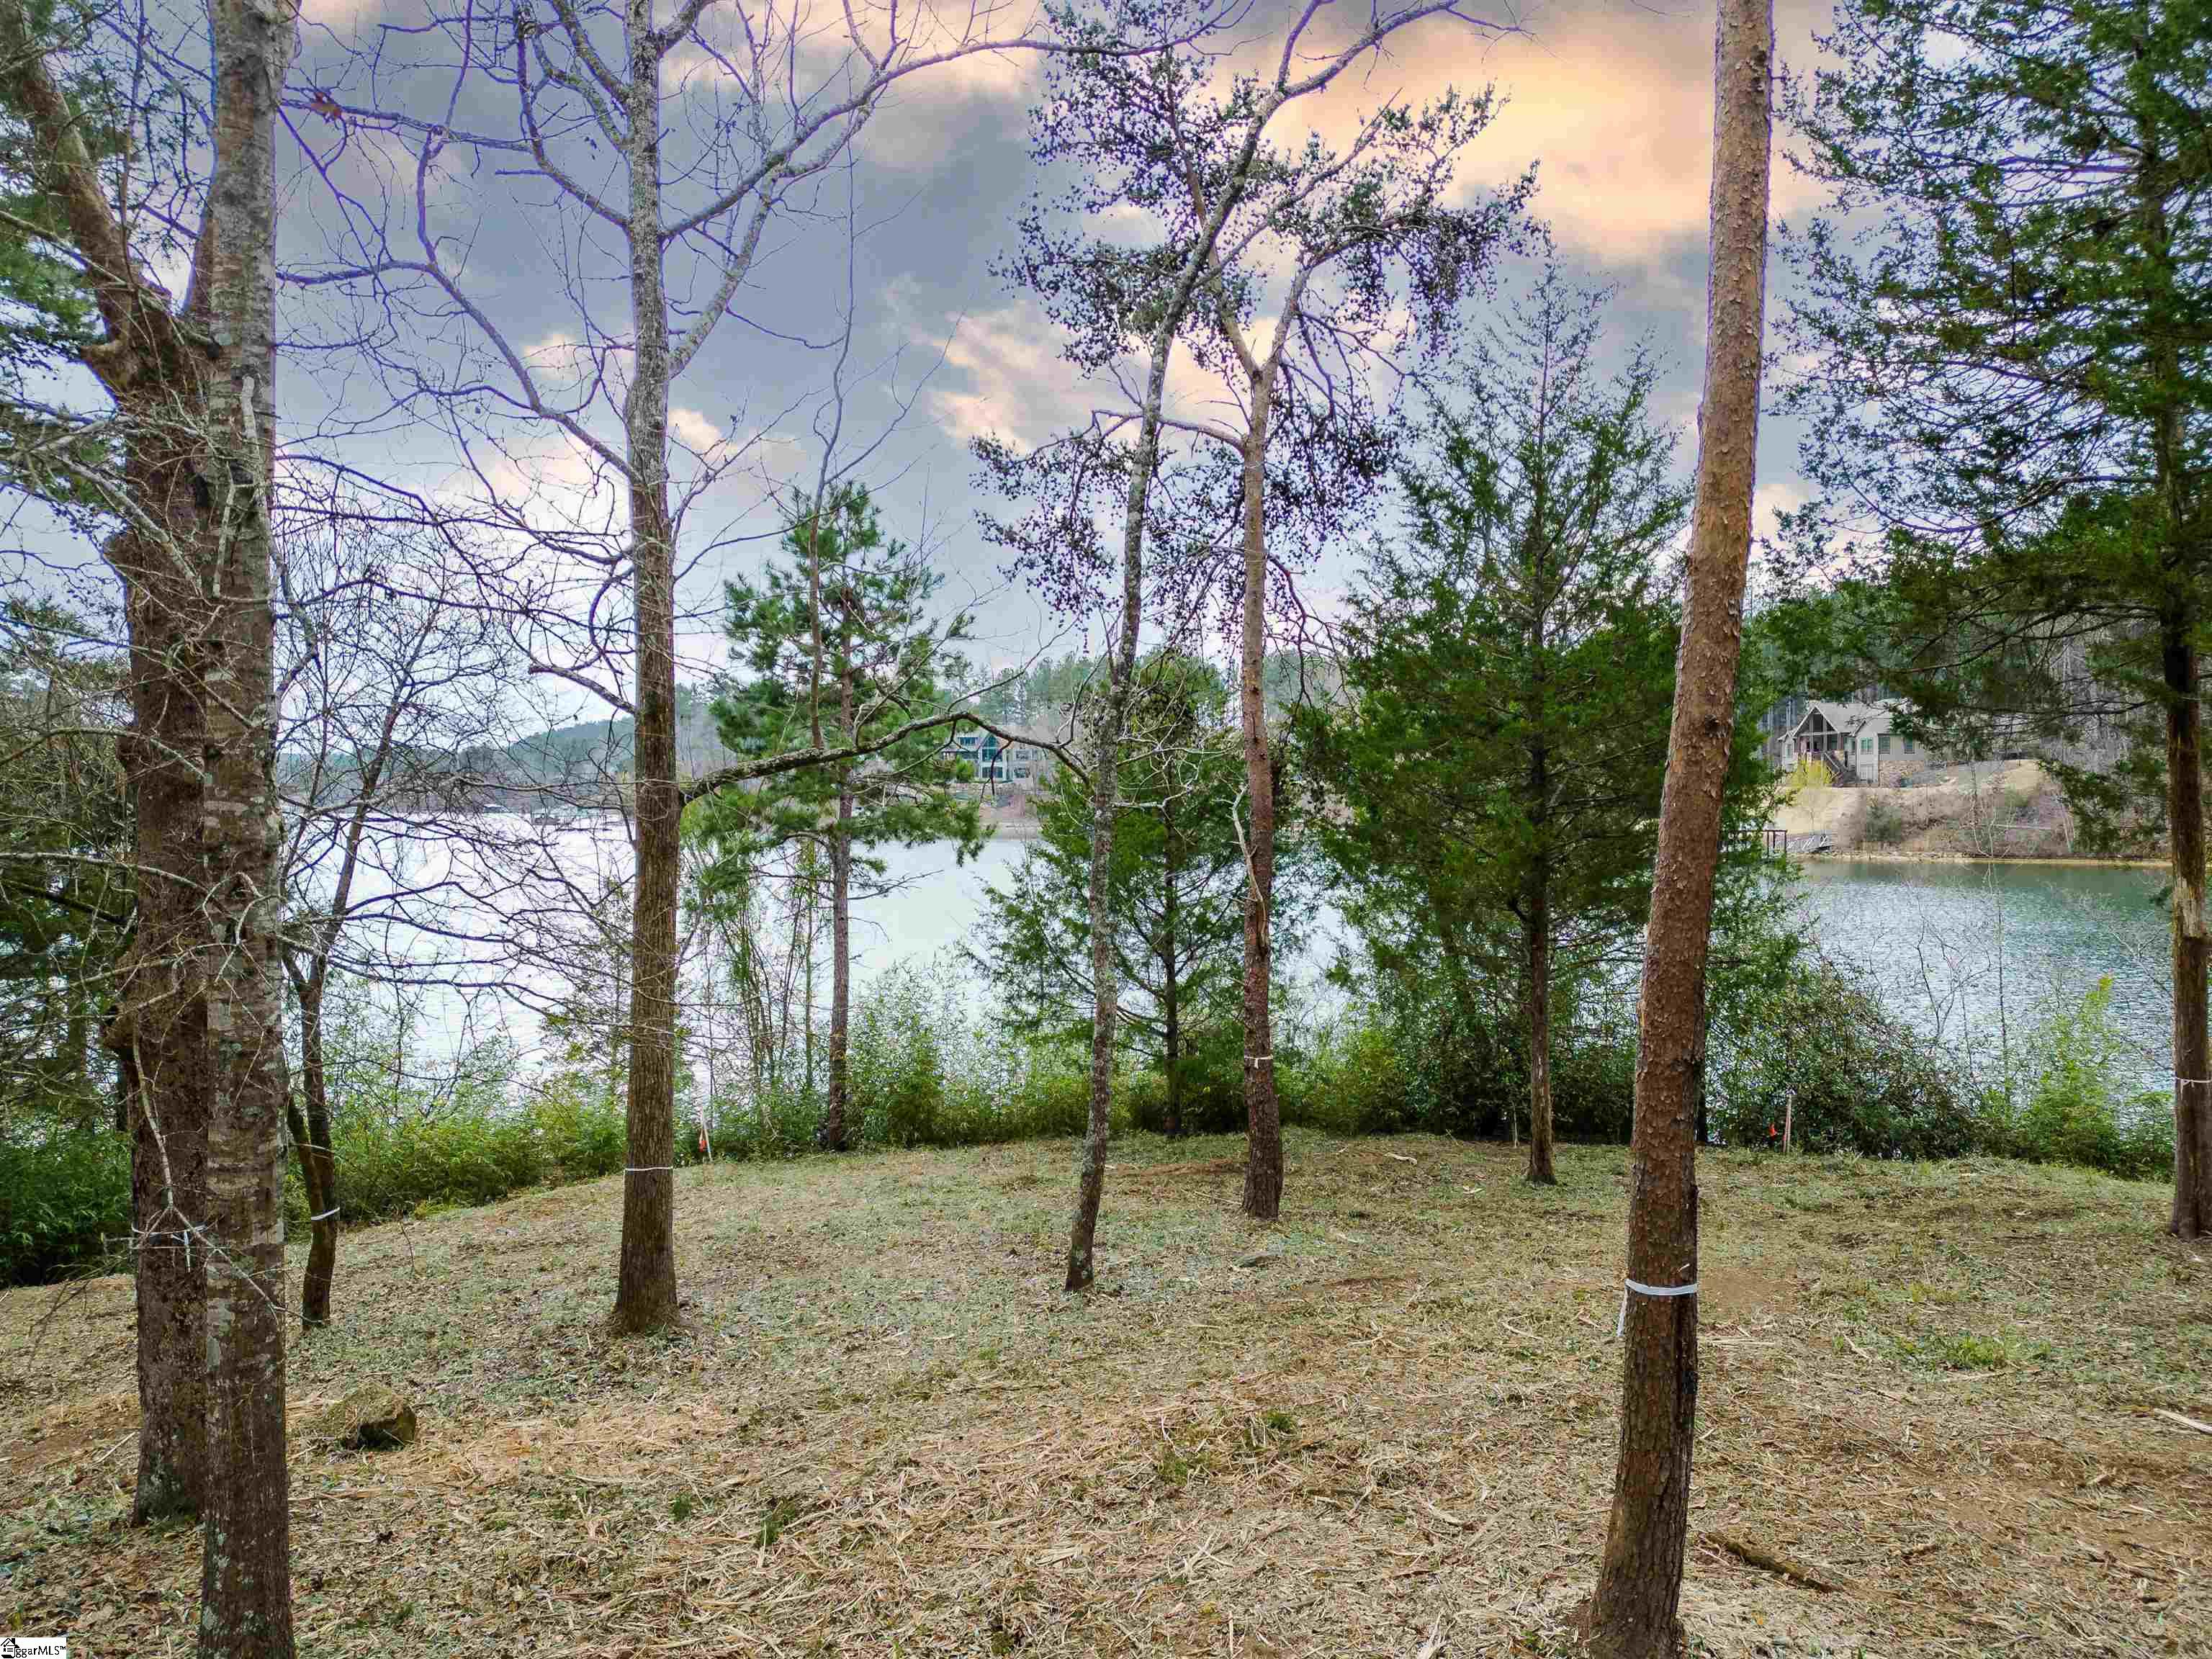 A rare opportunity to own an island retreat in one of the premier community enclaves on spectacular Lake Keowee. This waterfront 1.67-acre beauty features loads of glorious shoreline and lies within The Cliffs at Keowee Springs, where an amenity-rich environment surrounds your future dream home’s panoramic lake views. The unique peninsula homesite is made even more desirable by its topography, allowing an easy stroll on a gently sloping grade to the shimmering shoreline, where a newly installed dock will launch your family’s sunset cruise and fun adventures on the lake. Tucked away in a quiet cove, the lot is fully encircled by a waterfront expanse with multiple beach areas. Quick access to open water and golf excursions by boat to nearby Cliffs’ Falls and Vineyards communities. The new Keowee Springs Clubhouse is under way and will open at the Tom Fazio-designed golf course in 2024, joining the Beach Club and The Landing Lake Club as neighborhood sporting, wellness and social amenities unrivaled anywhere on the lake. Situated 20 minutes from downtown Clemson. The nationally renowned shopping / restaurant and arts district in Greenville is only 45 minutes away. Capture your legacy coming to life on one of the last remaining premier lots on Lake Keowee. Building envelope easily accommodates various custom home designs. To help expedite the building process a copy of completed tree and topographic survey, custom home and site plans are available. A Cliffs membership is available for purchase.